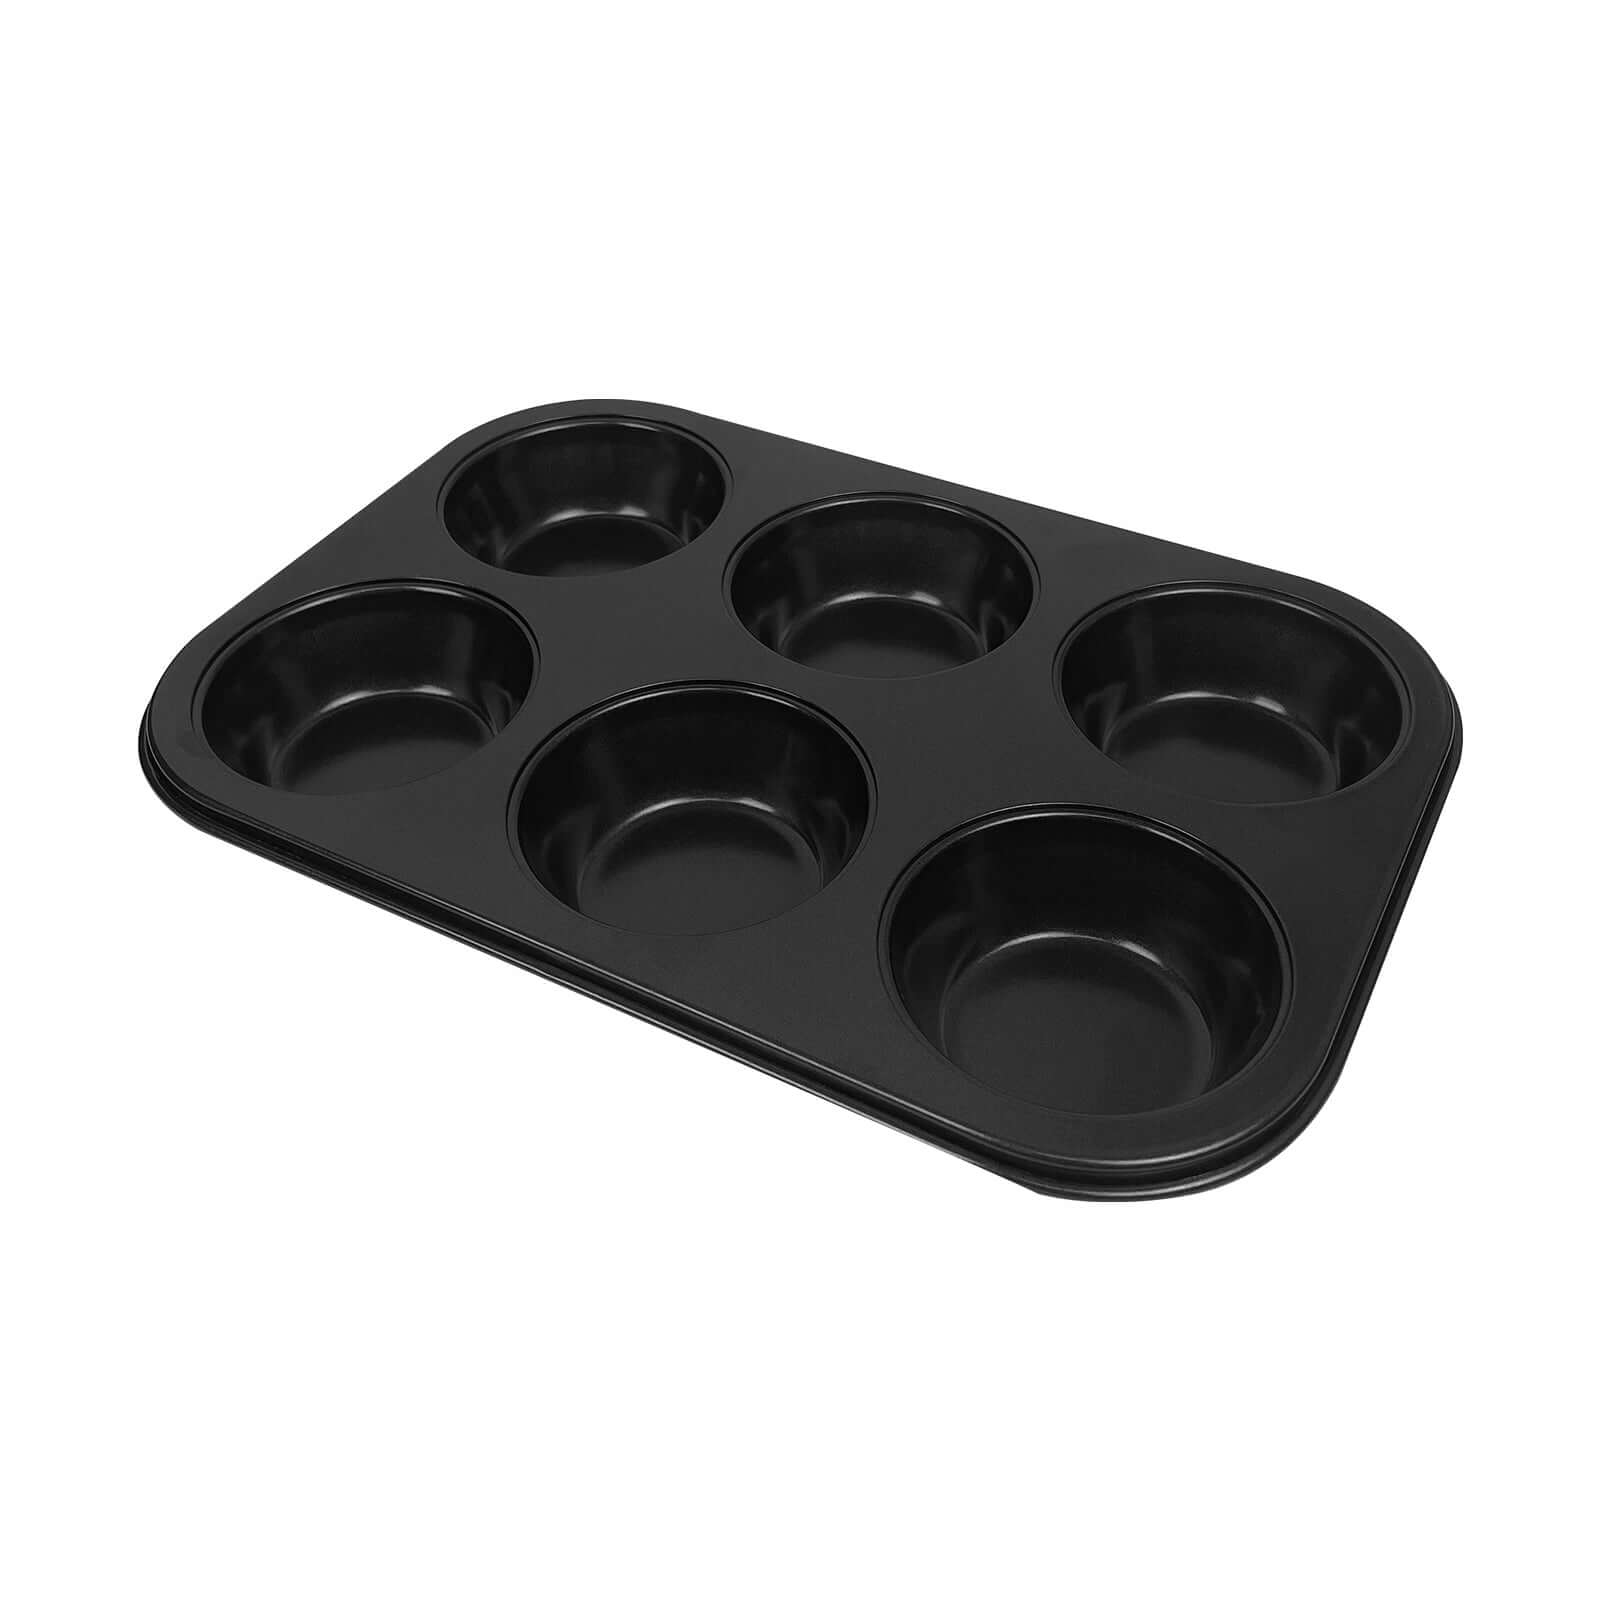 HYSapientia 6 Cup Muffin Yorkshire Pudding Tray